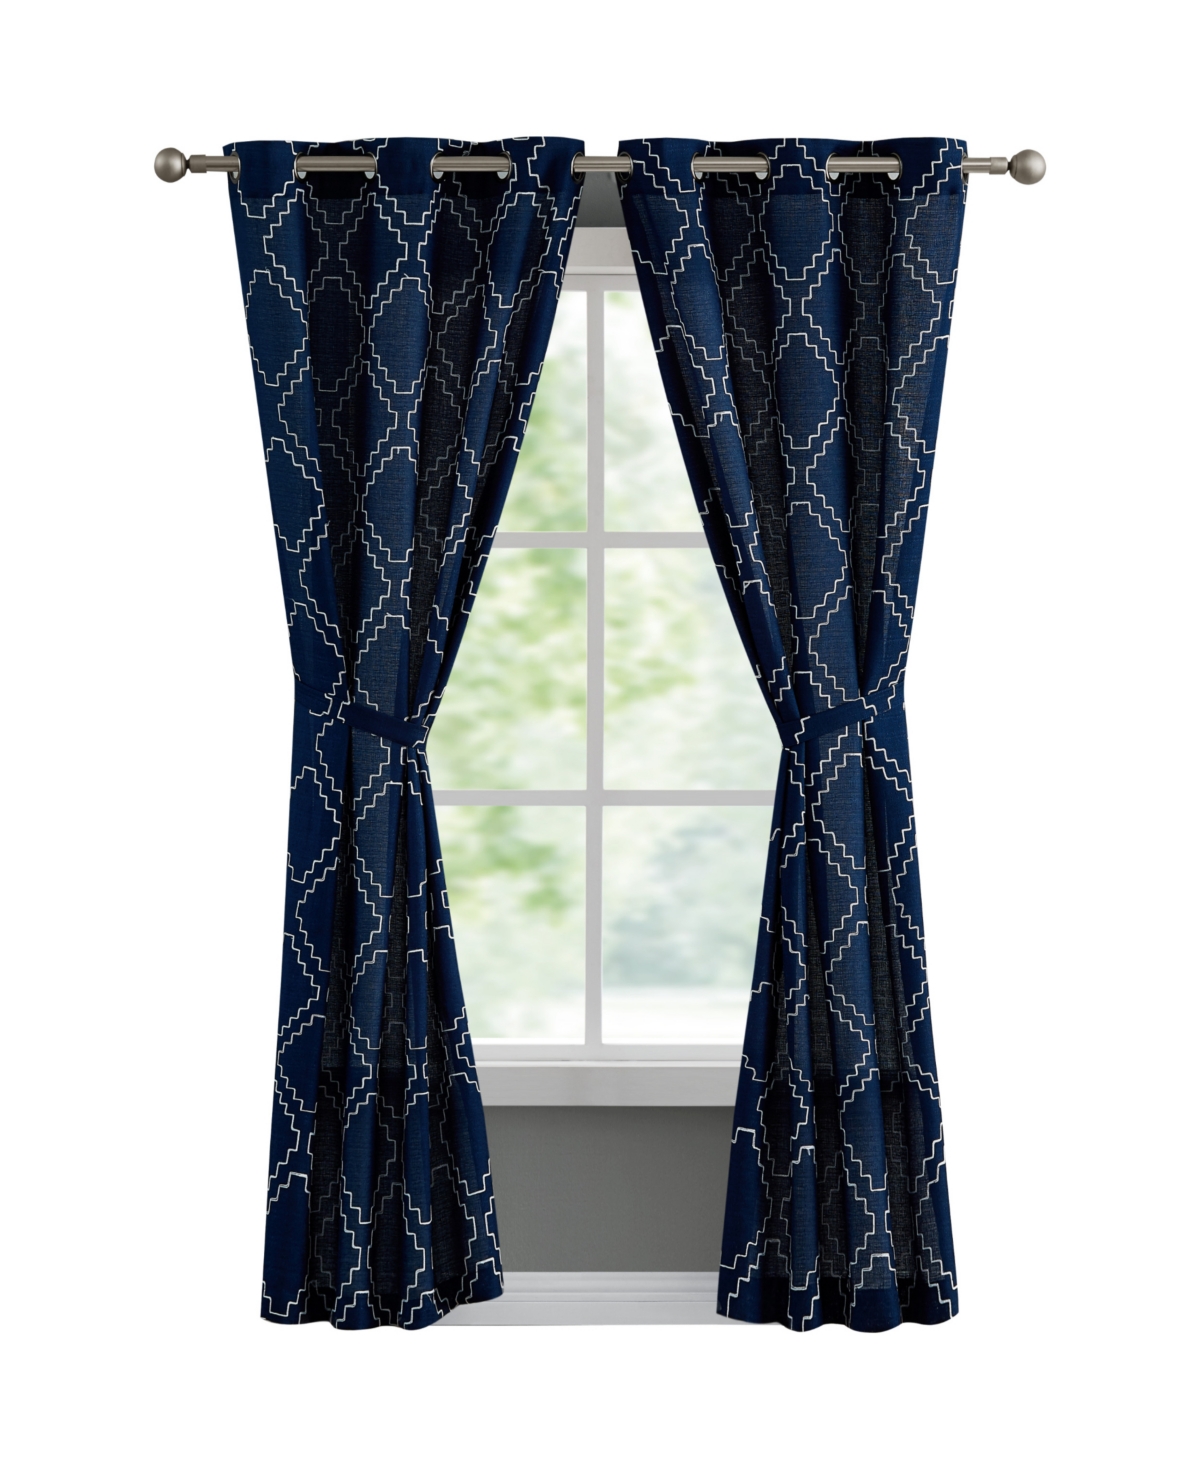 Shop French Connection Somerset Embroidered Light Filtering Grommet Window Curtain Panel Pair With Tiebacks, 38" X 96" In Indigo